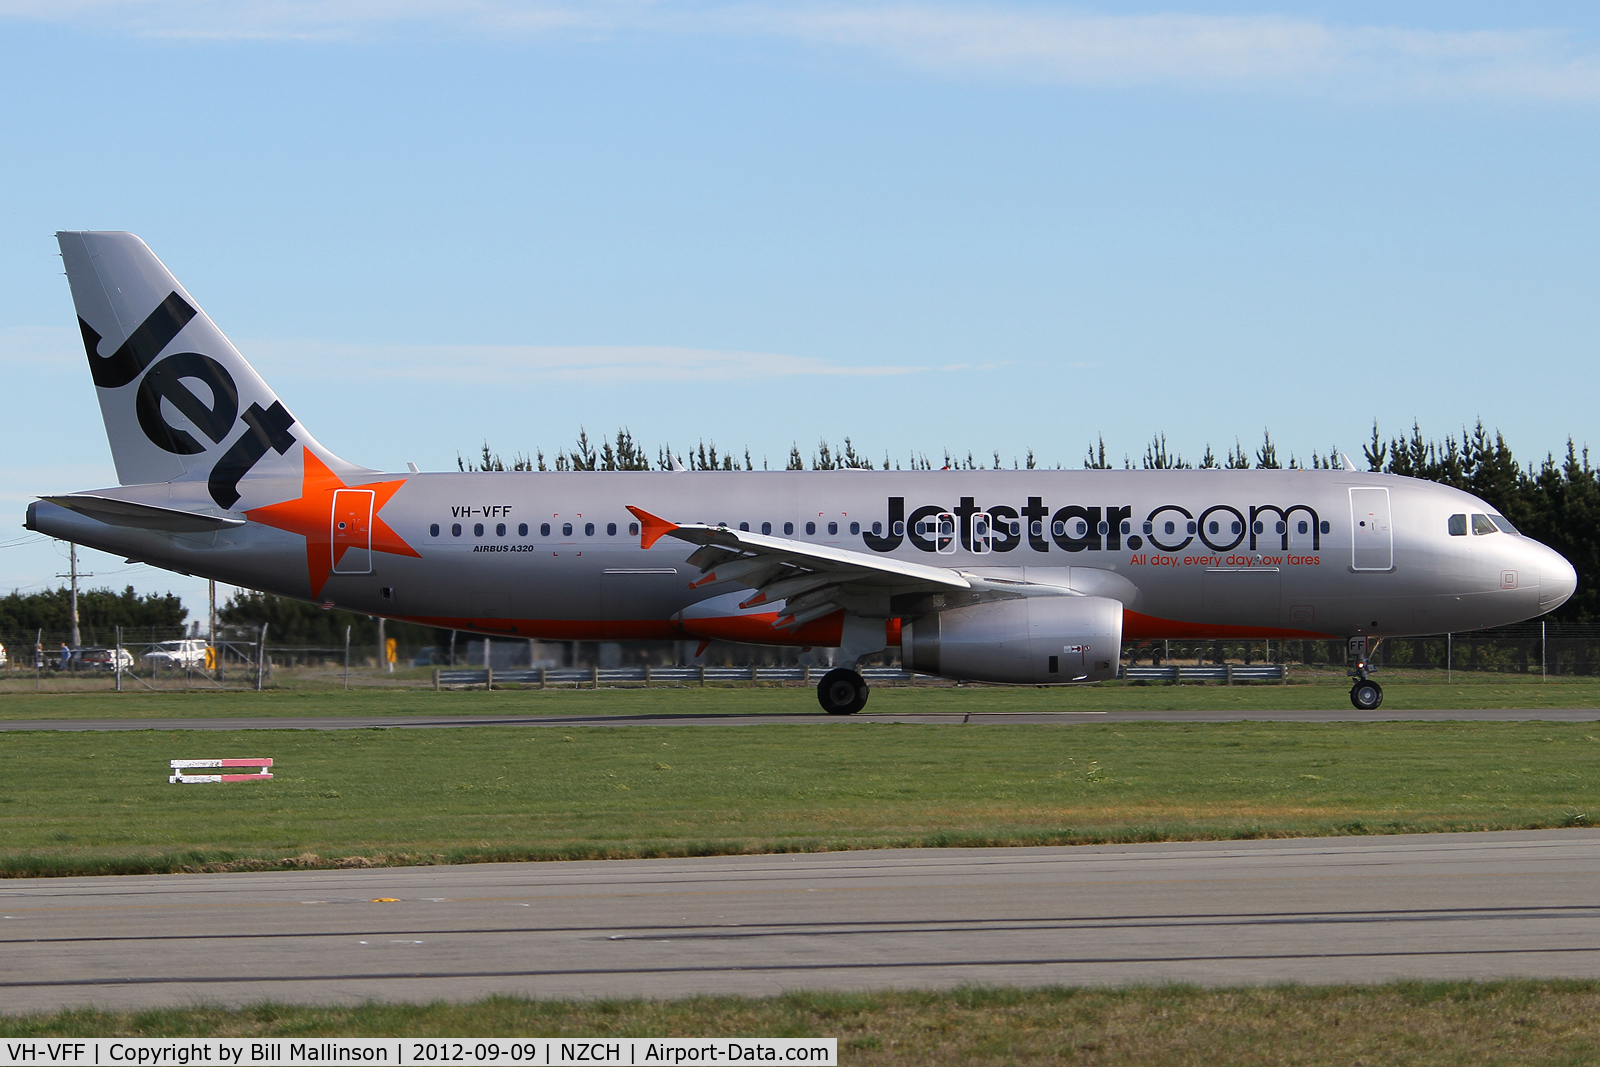 VH-VFF, 2012 Airbus A320-232 C/N 5039, taxi from 29